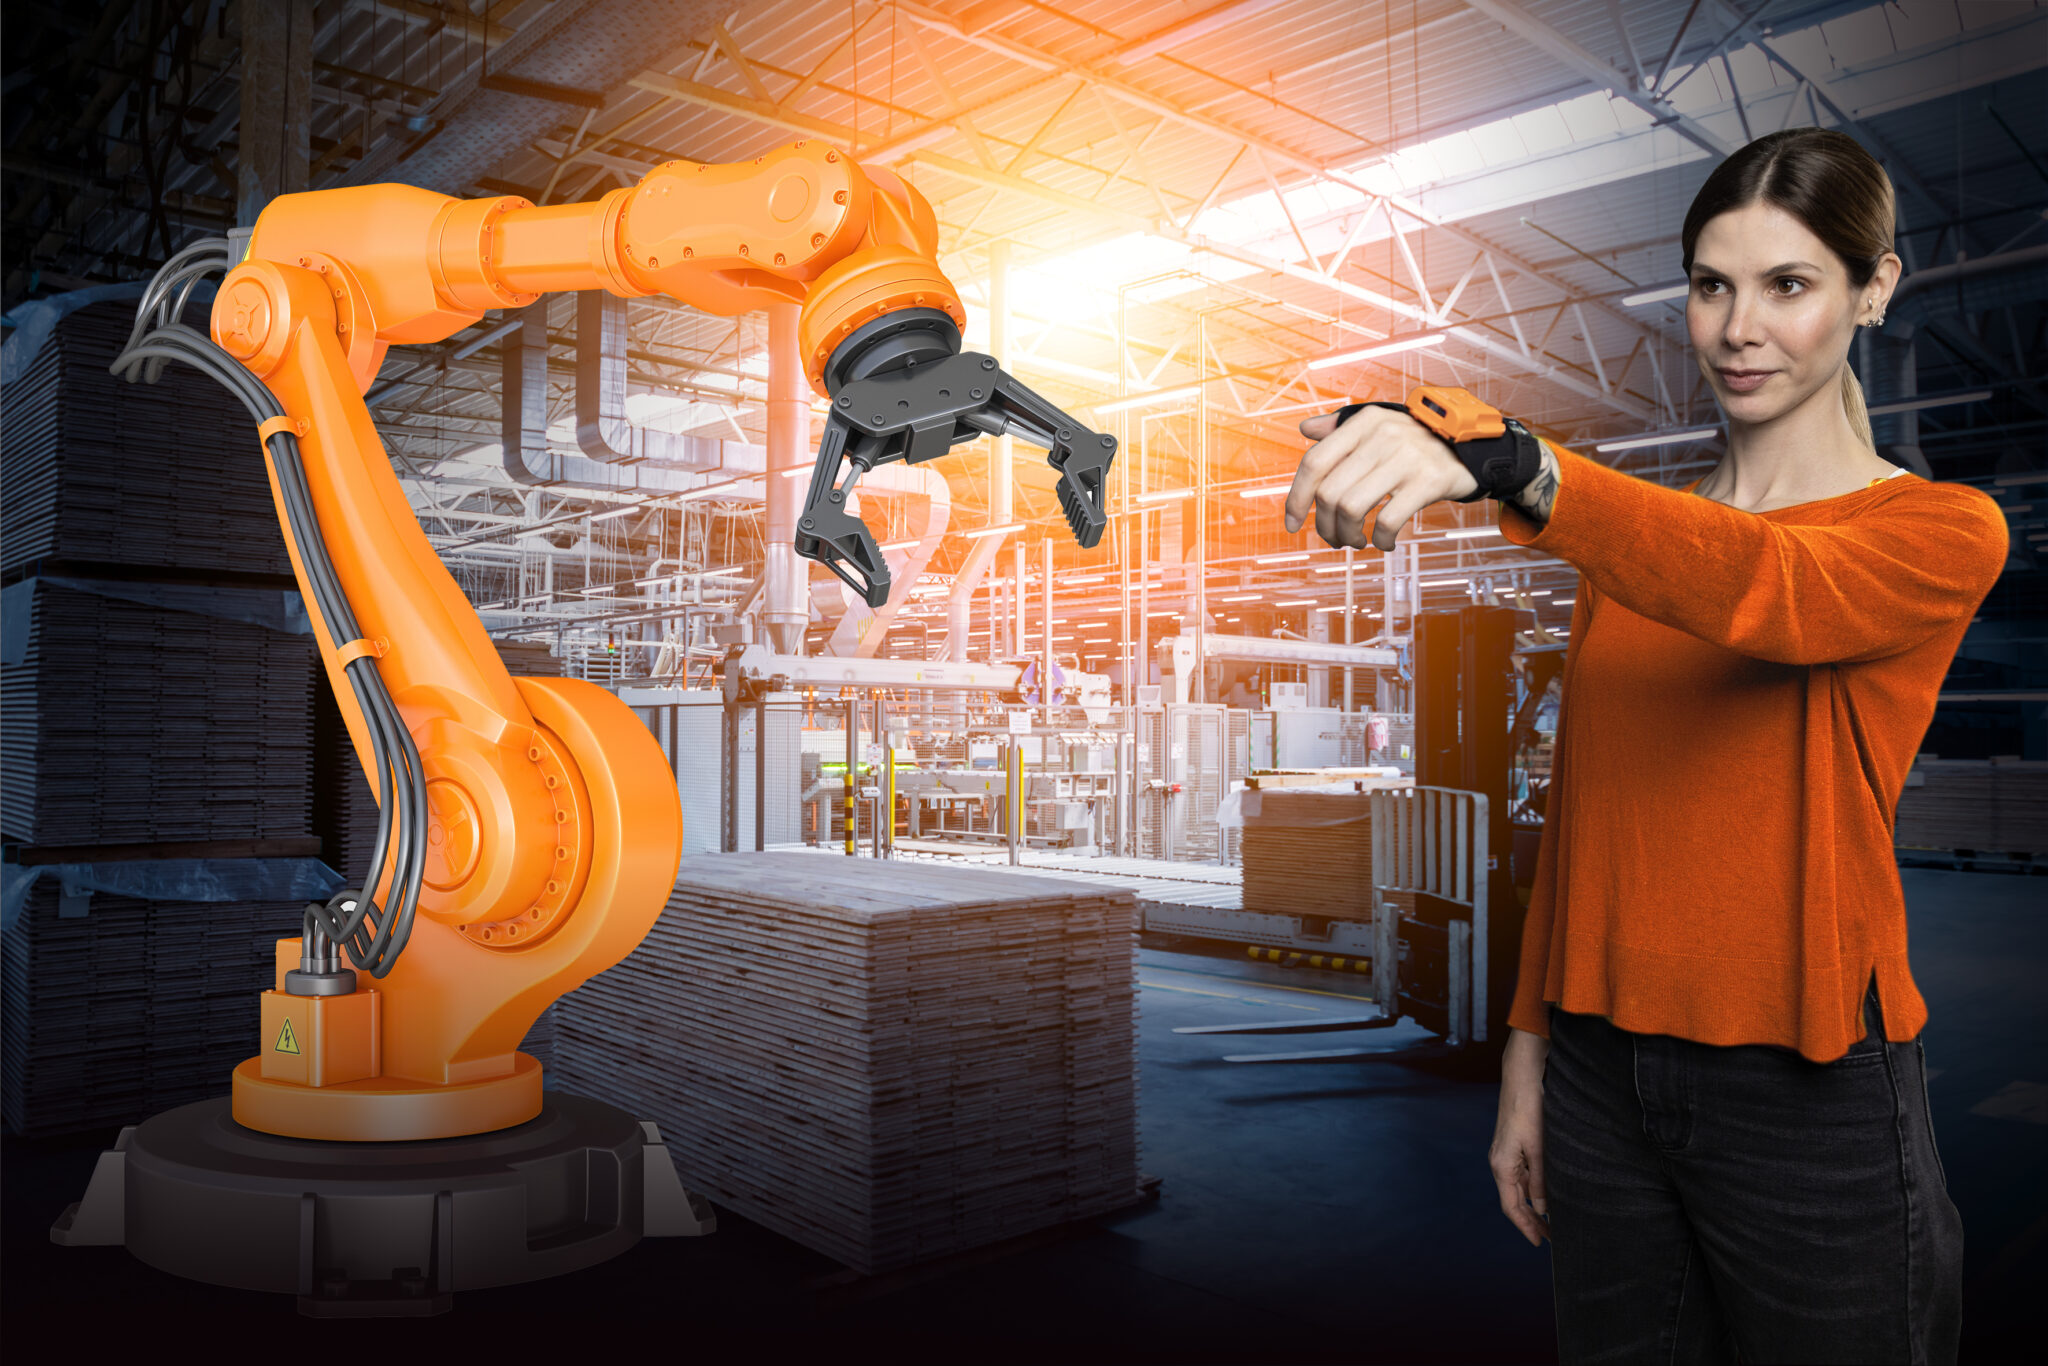 Only Half Of Retail Managers Are Satisfied With Current Automation And Robotics Initiatives | ProGlove wearable barcode scanners